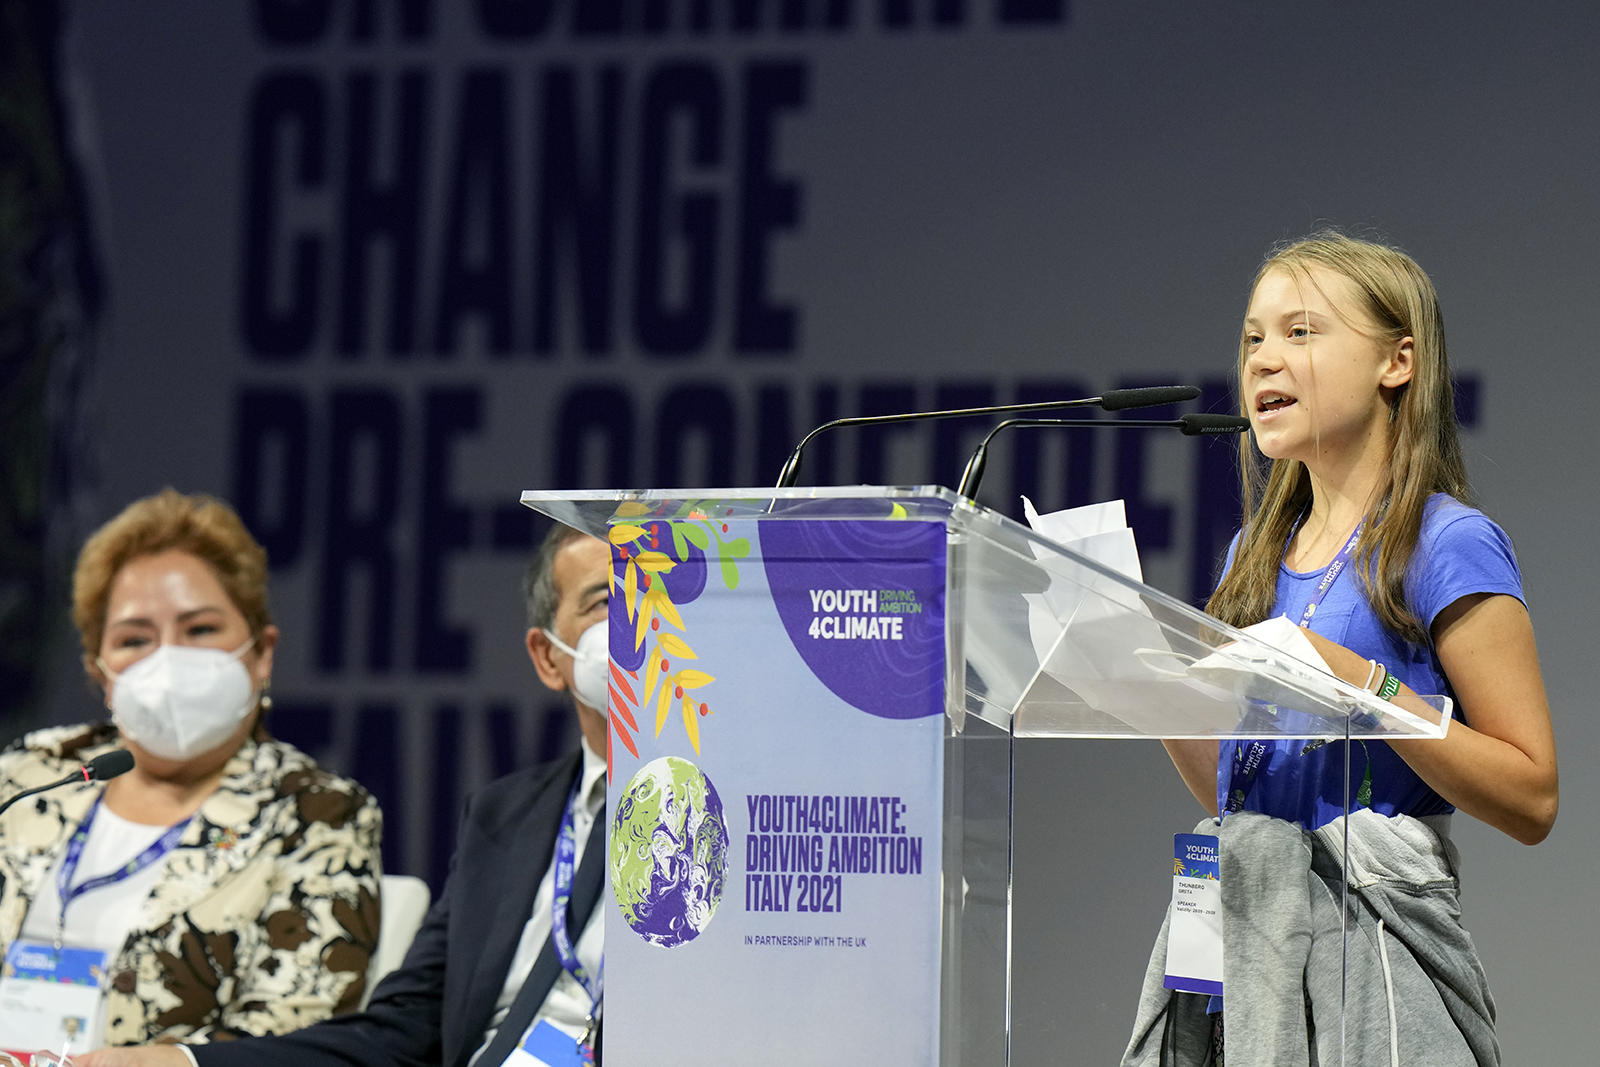 Swedish climate activist Greta Thunberg speaks during a three-day Youth for Climate summit in Milan, Italy, Tuesday, Sept. 28, 2021. Sitting at left is Patricia Espinosa, Executive Secretary of the United Nations Framework Convention on Climate Change (UNFCCC). (AP Photo/Luca Bruno)